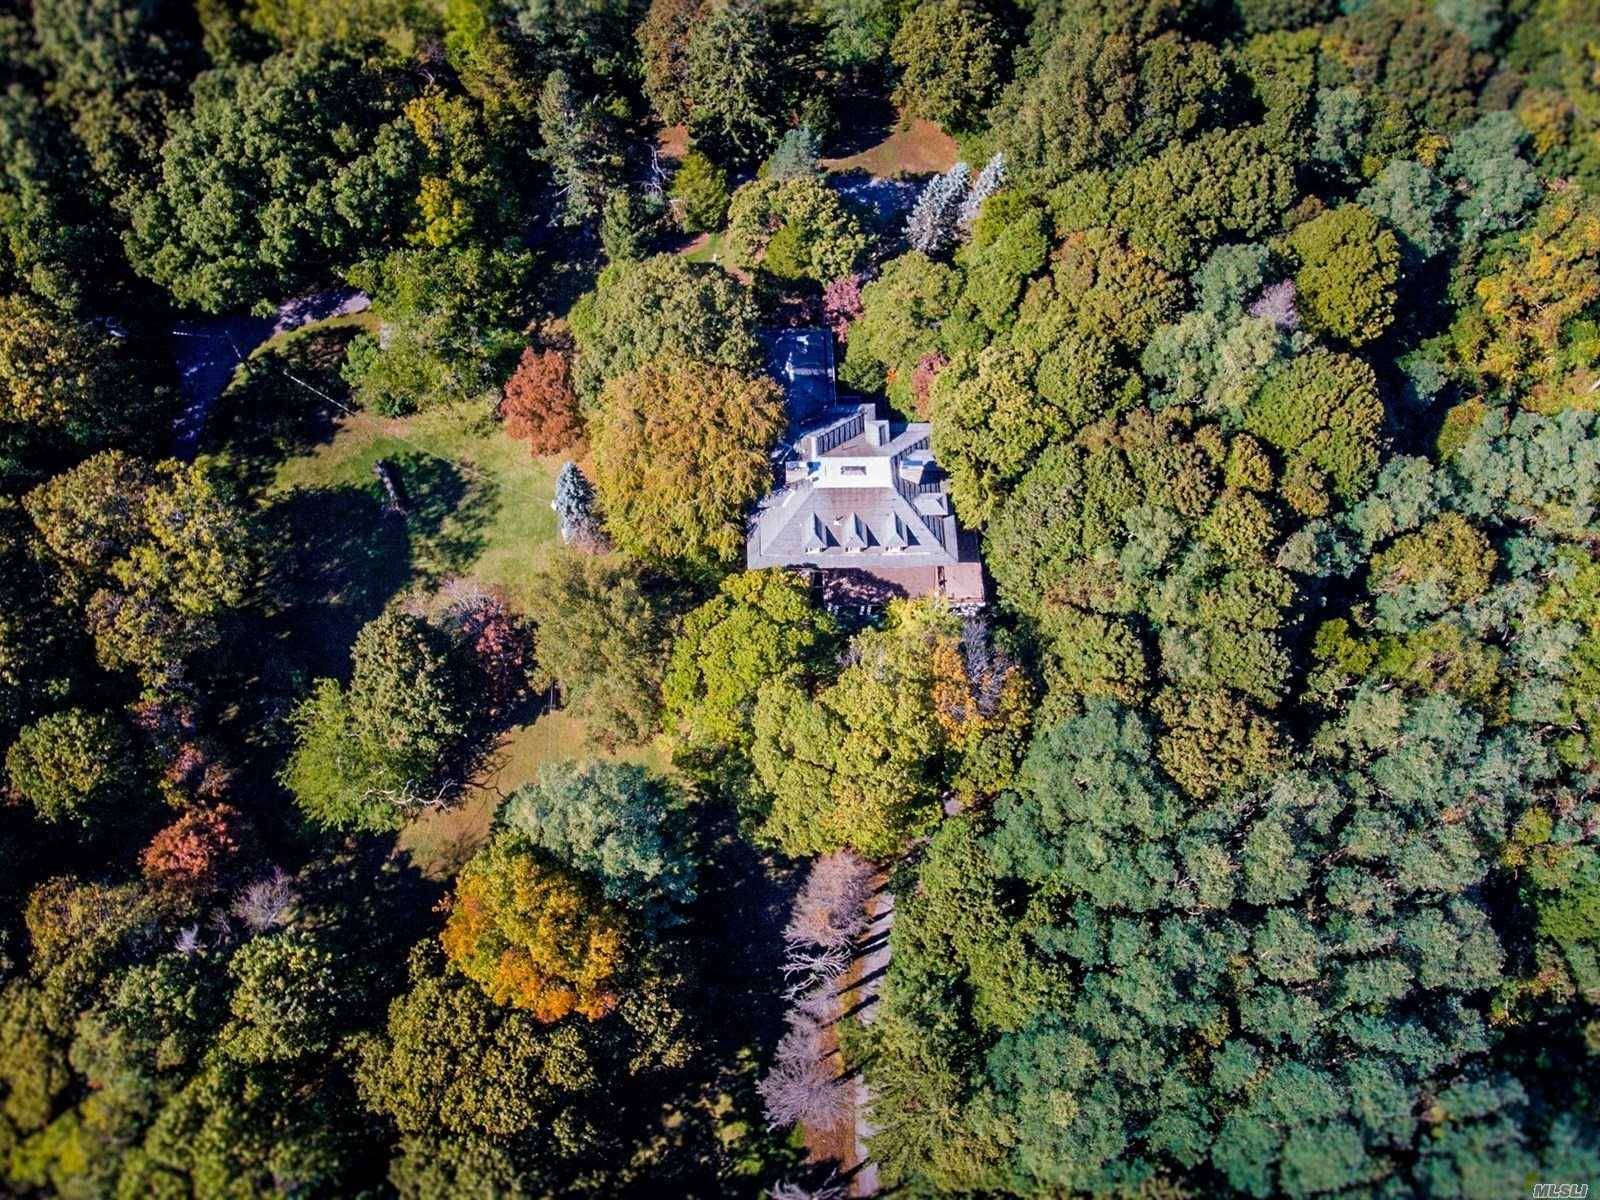 21. 17 Acres In The Hamlet Of Fort Salonga Conveniently Located 1 Hour From Nyc Hamptons A Rare Opportunity With Possible Subdivision, Zoned 1 Acre Residential.